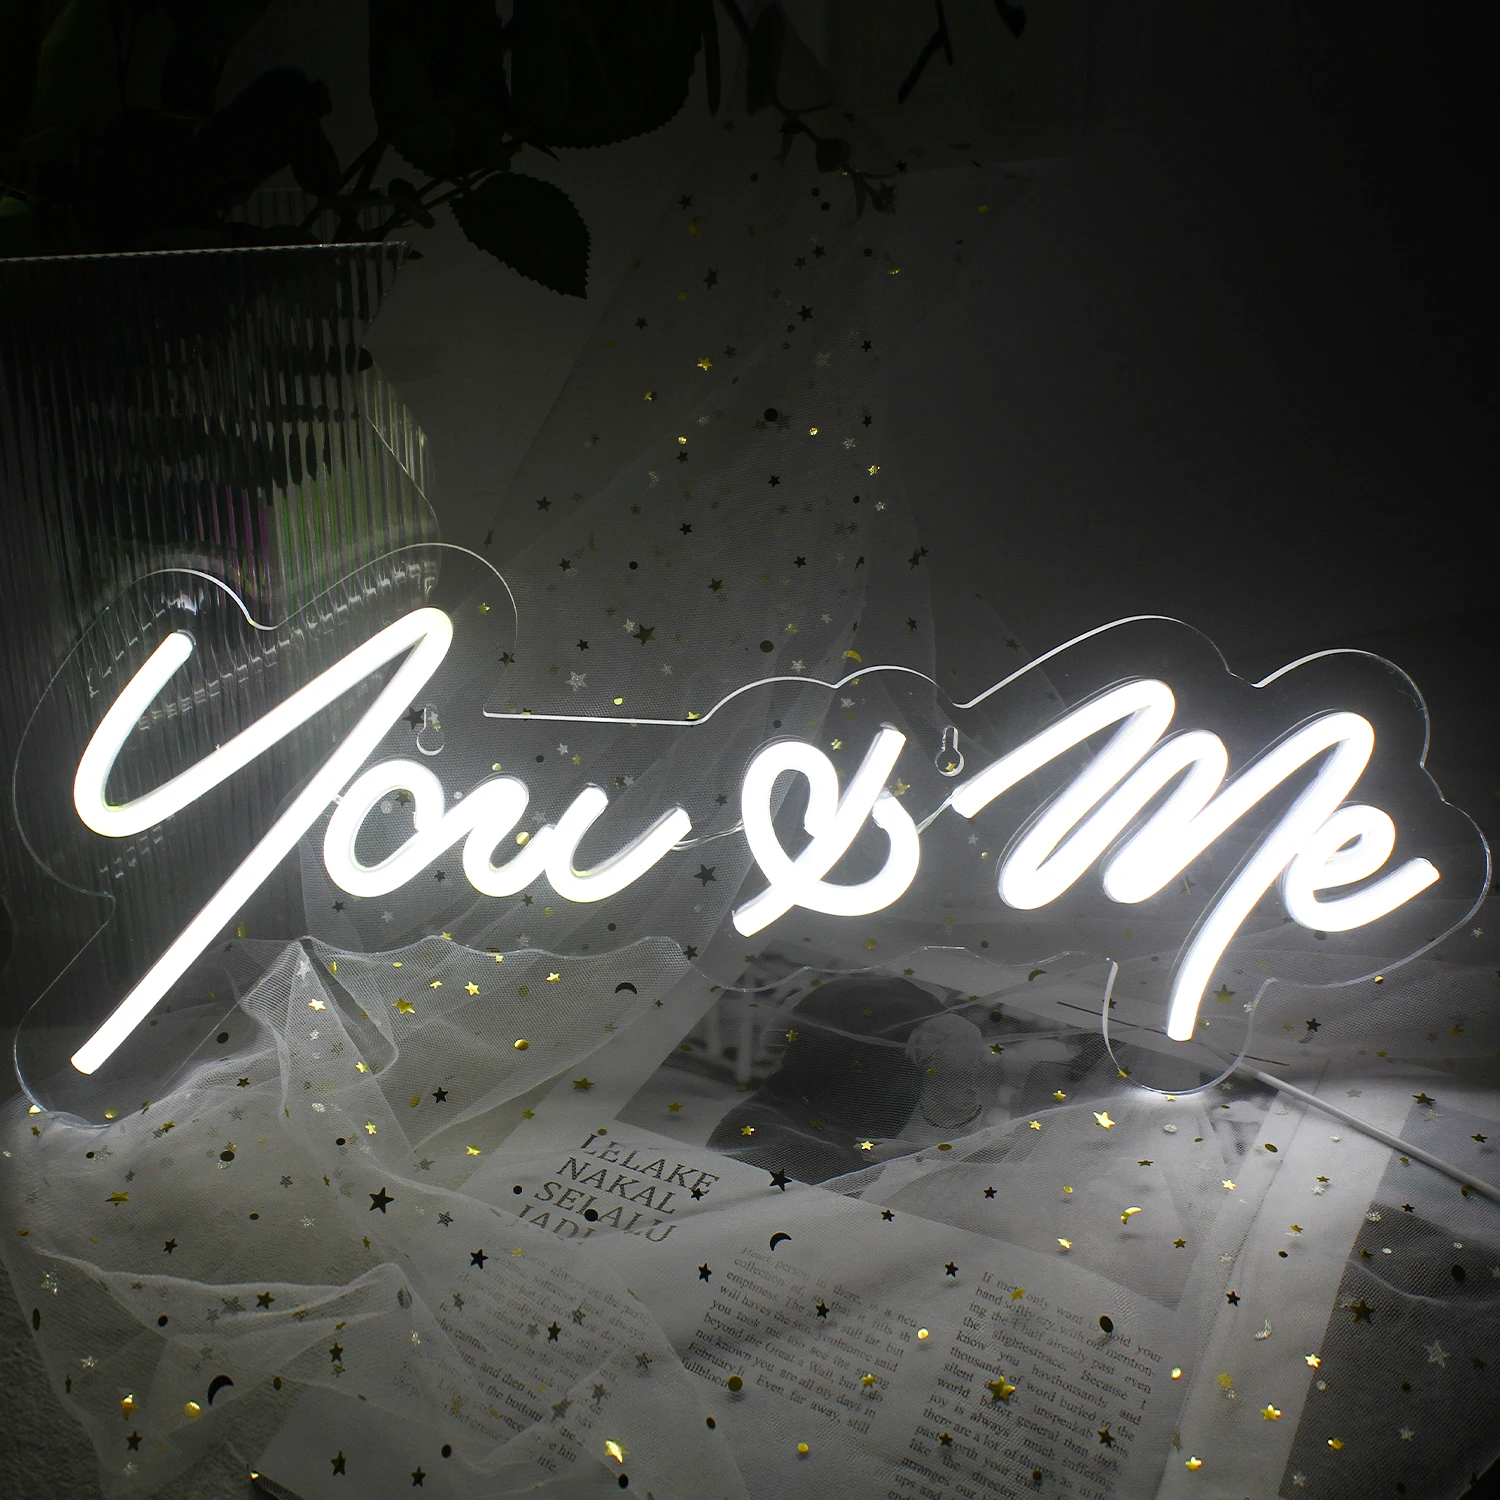 Ineonlife You & Me Neon Sign Light Up Lights Signs Indoor Bedroom Room Wall Decor Led Bar Christmas Party Wedding Girl Boy Gift